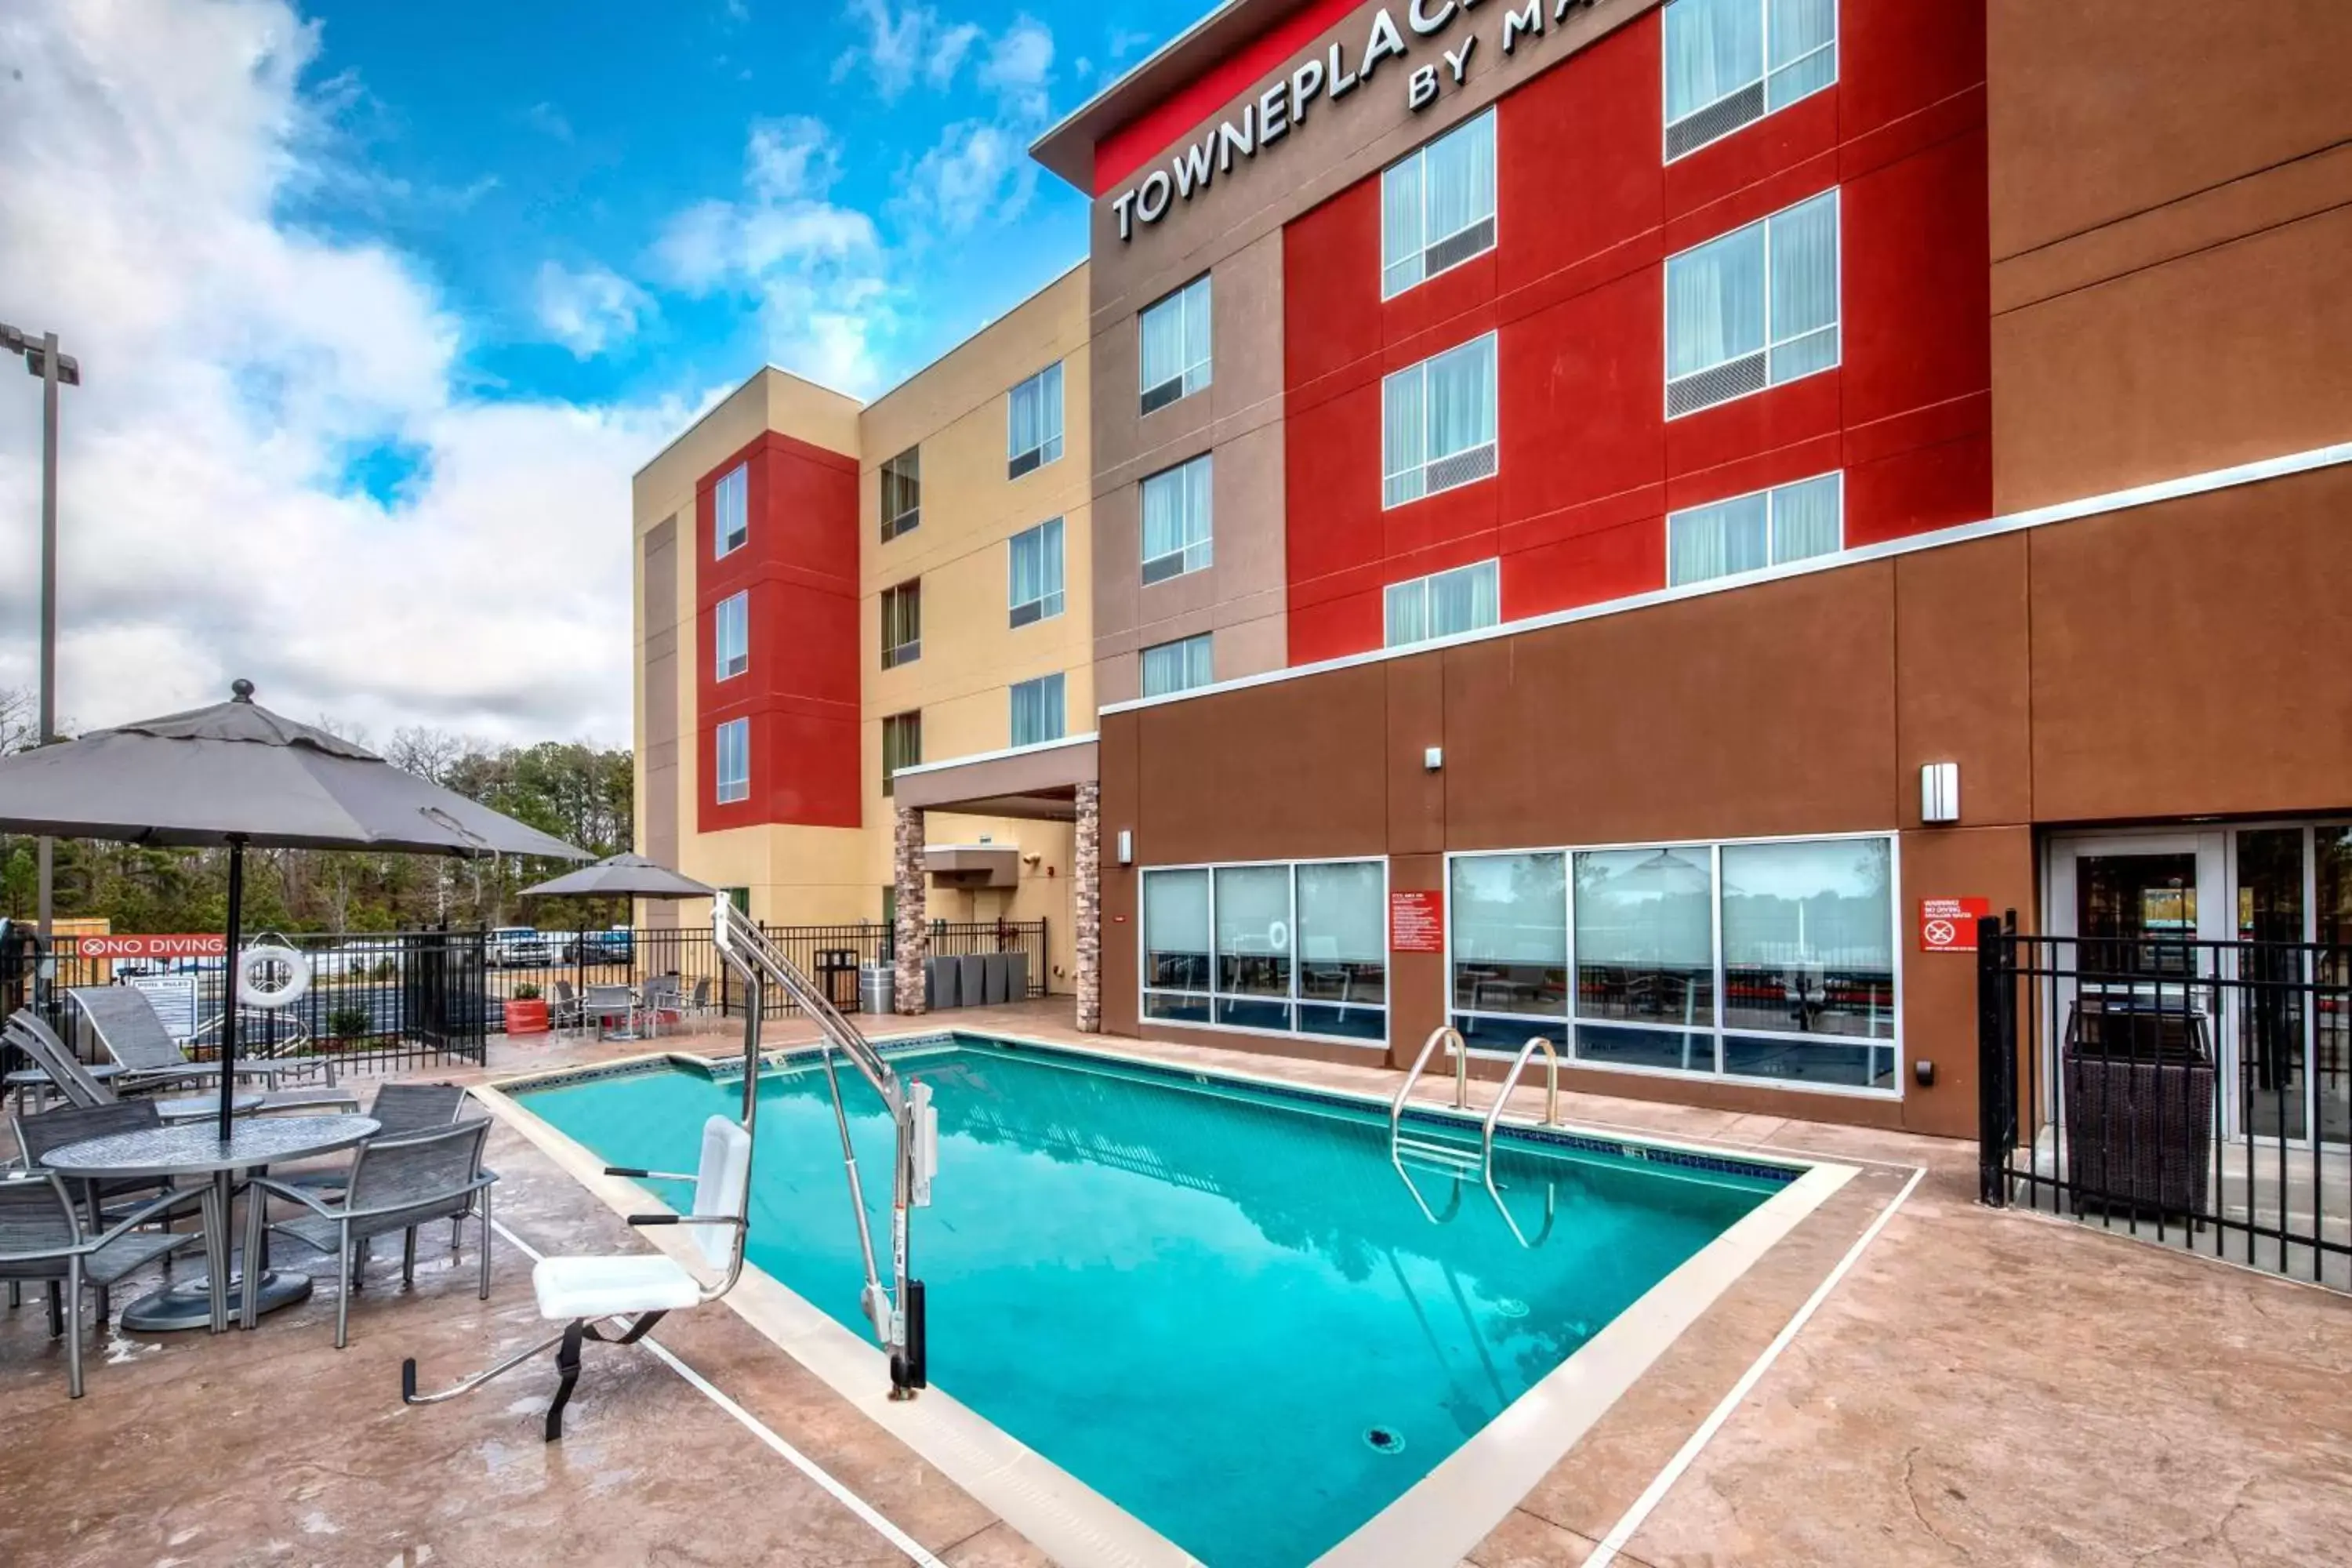 Swimming Pool in TownePlace Suites by Marriott Hot Springs